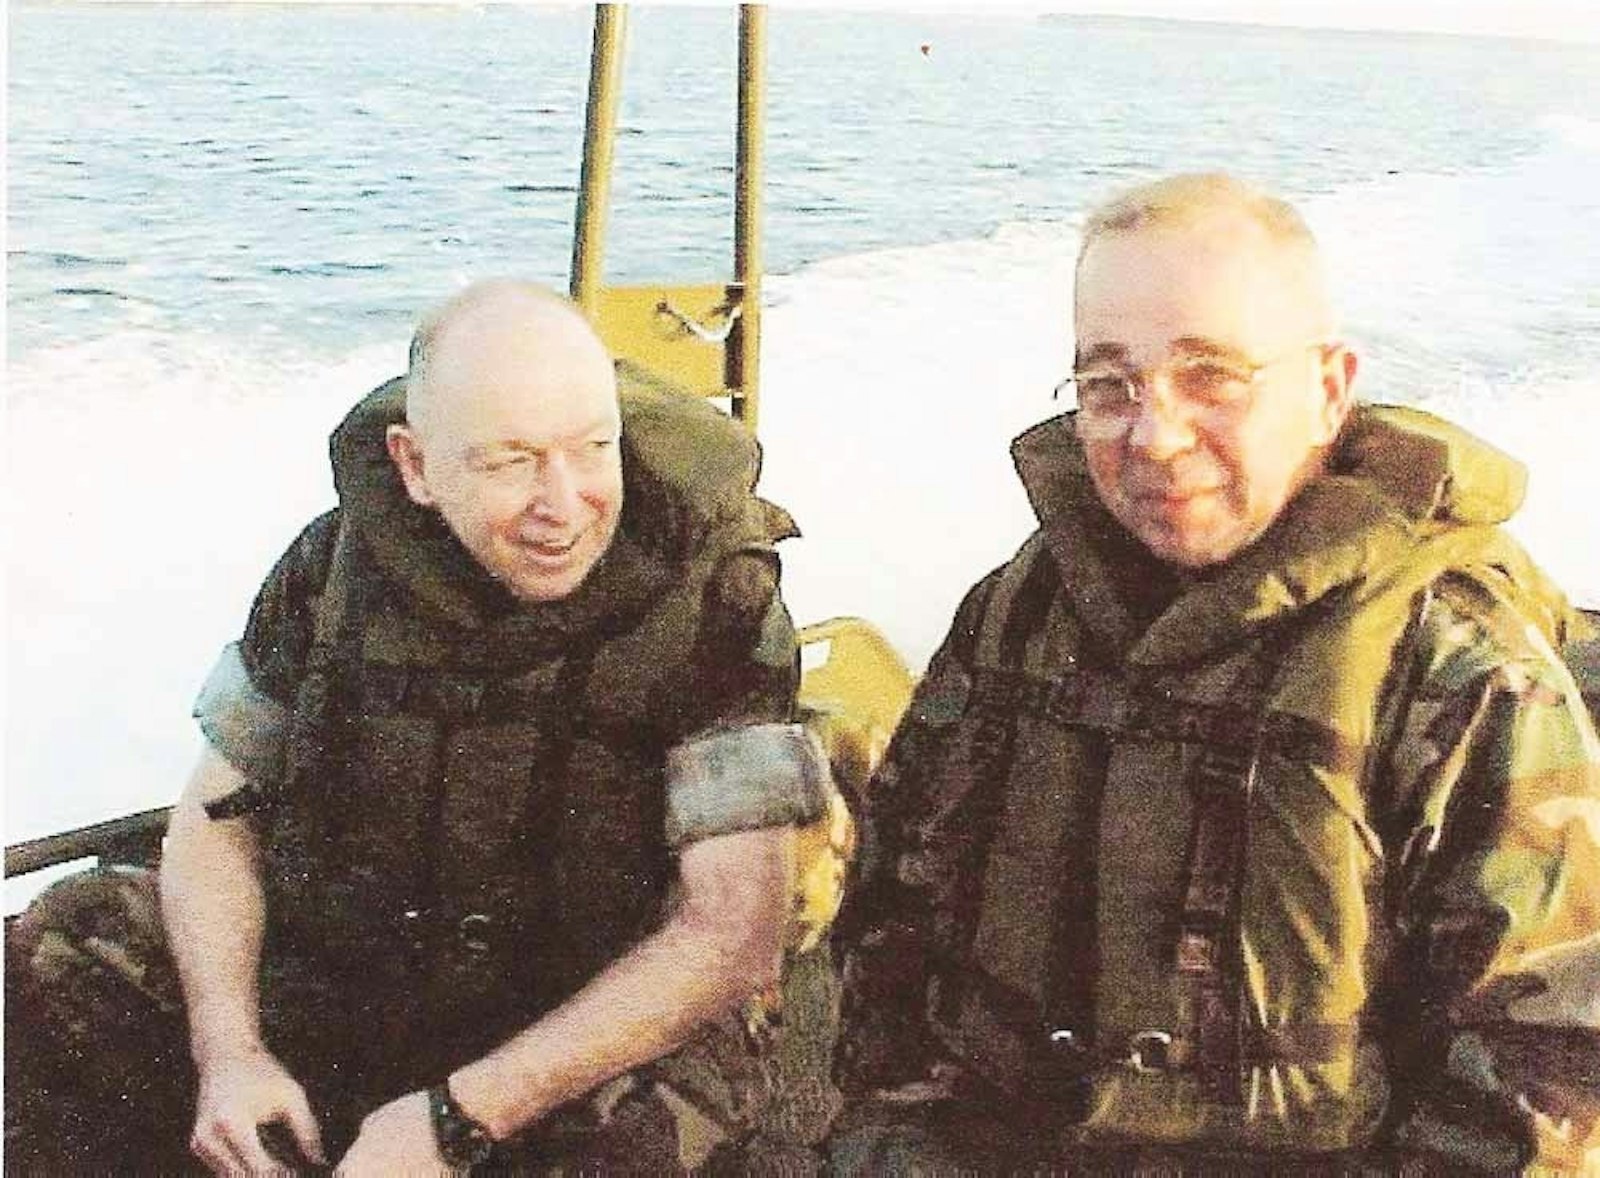 Msgr. John Kaul, left, and Protestant minister Tom Giuntoli head for Mass in 2001 at Camp Lejeune in North Carolina. (Archive photo)